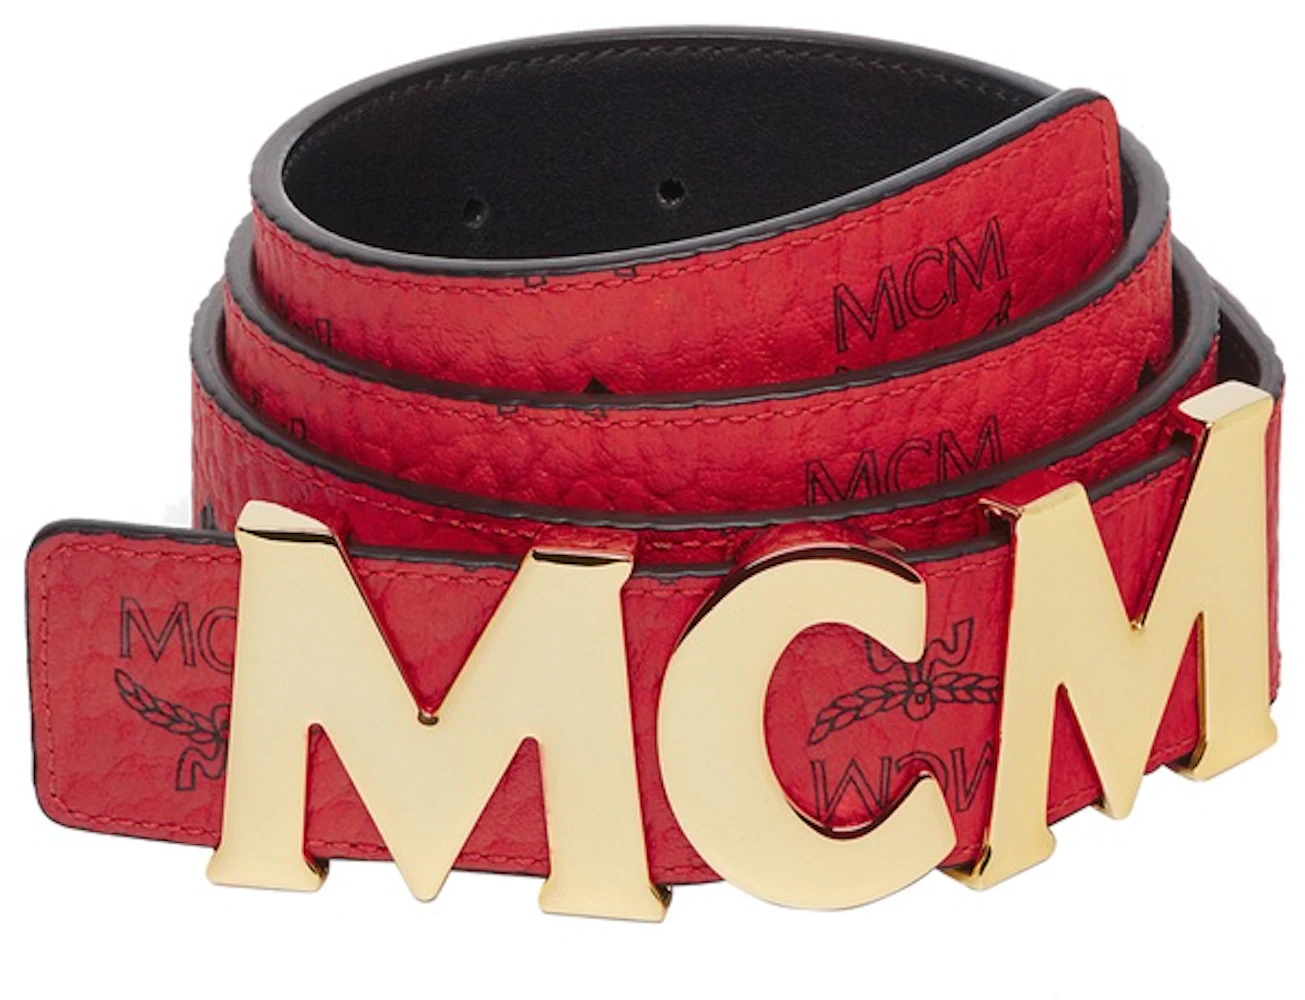 MCM Claus M Reversible Belt Visetos 1.75W 51In/130Cm Cognac in Coated  Canvas with 24k Gold - US